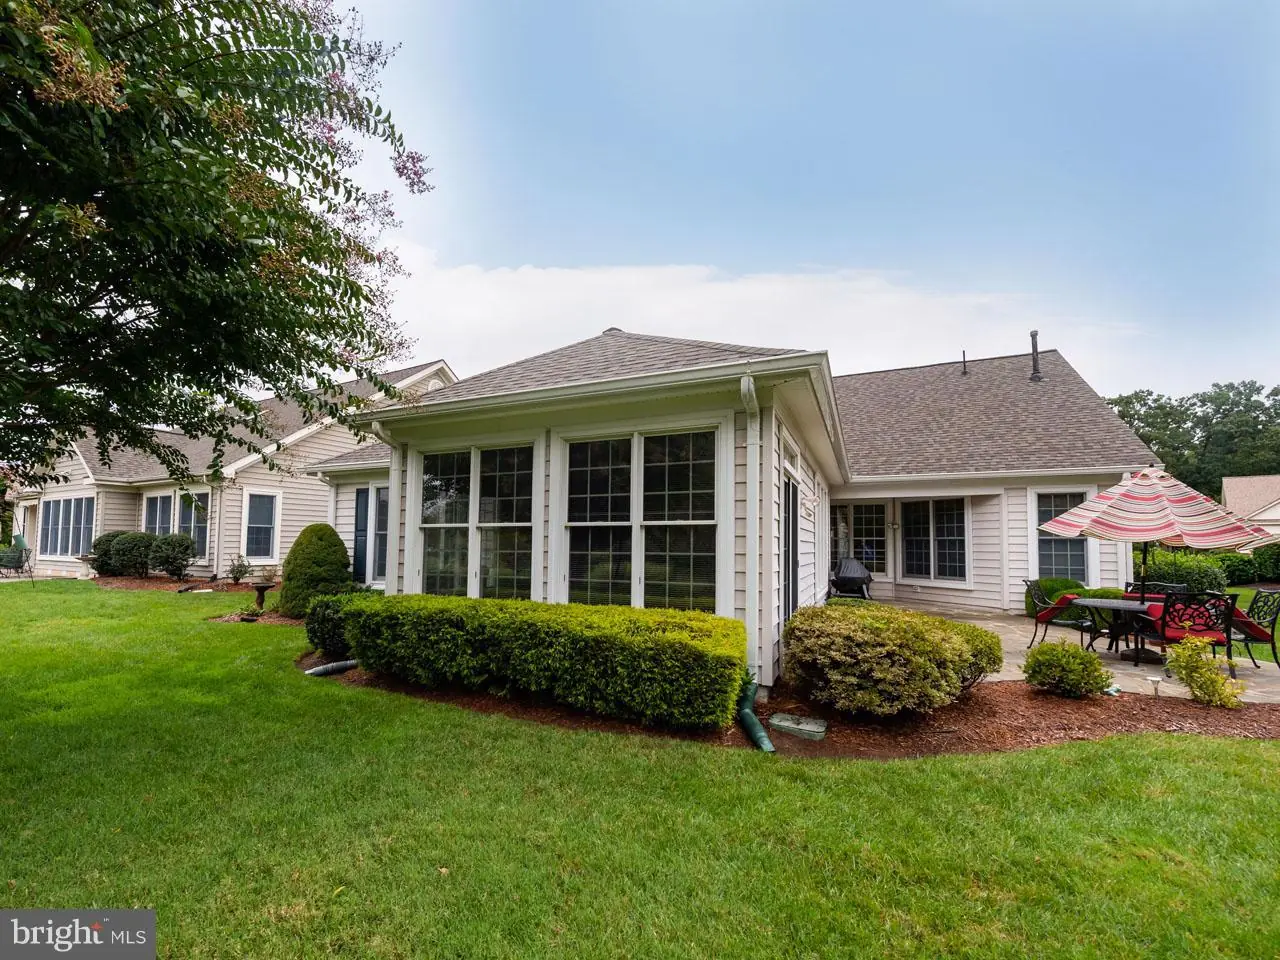 1005040466-300638083009-2018-11-01-11-25-35  |   | Gainesville Delaware Real Estate For Sale | MLS# 1005040466  - Best of Northern Virginia